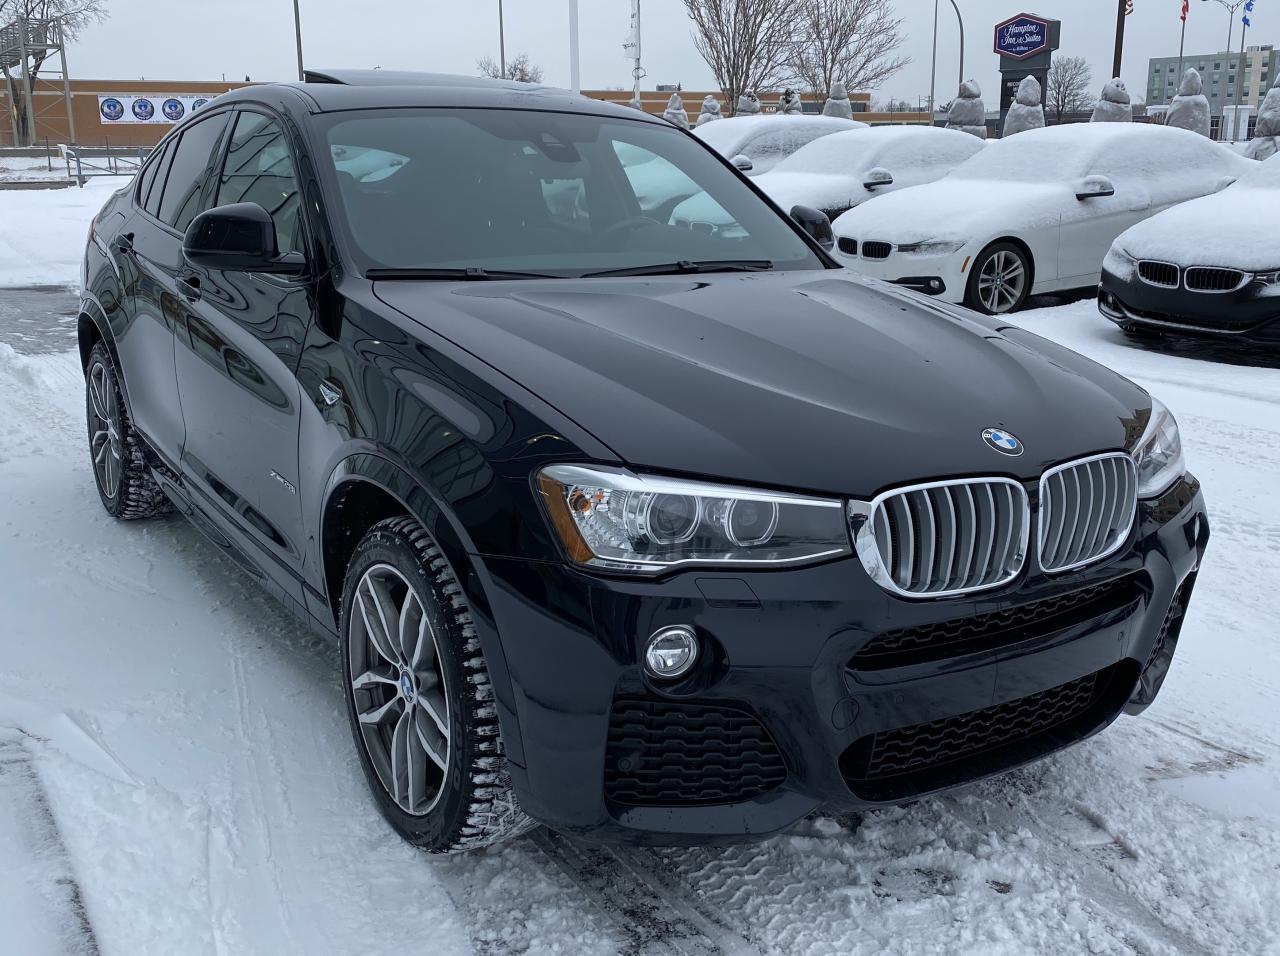 Used 2018 BMW X4 xDrive28i Sports Activity Coupe for Sale in Dorval, Quebec | www.waldenwongart.com